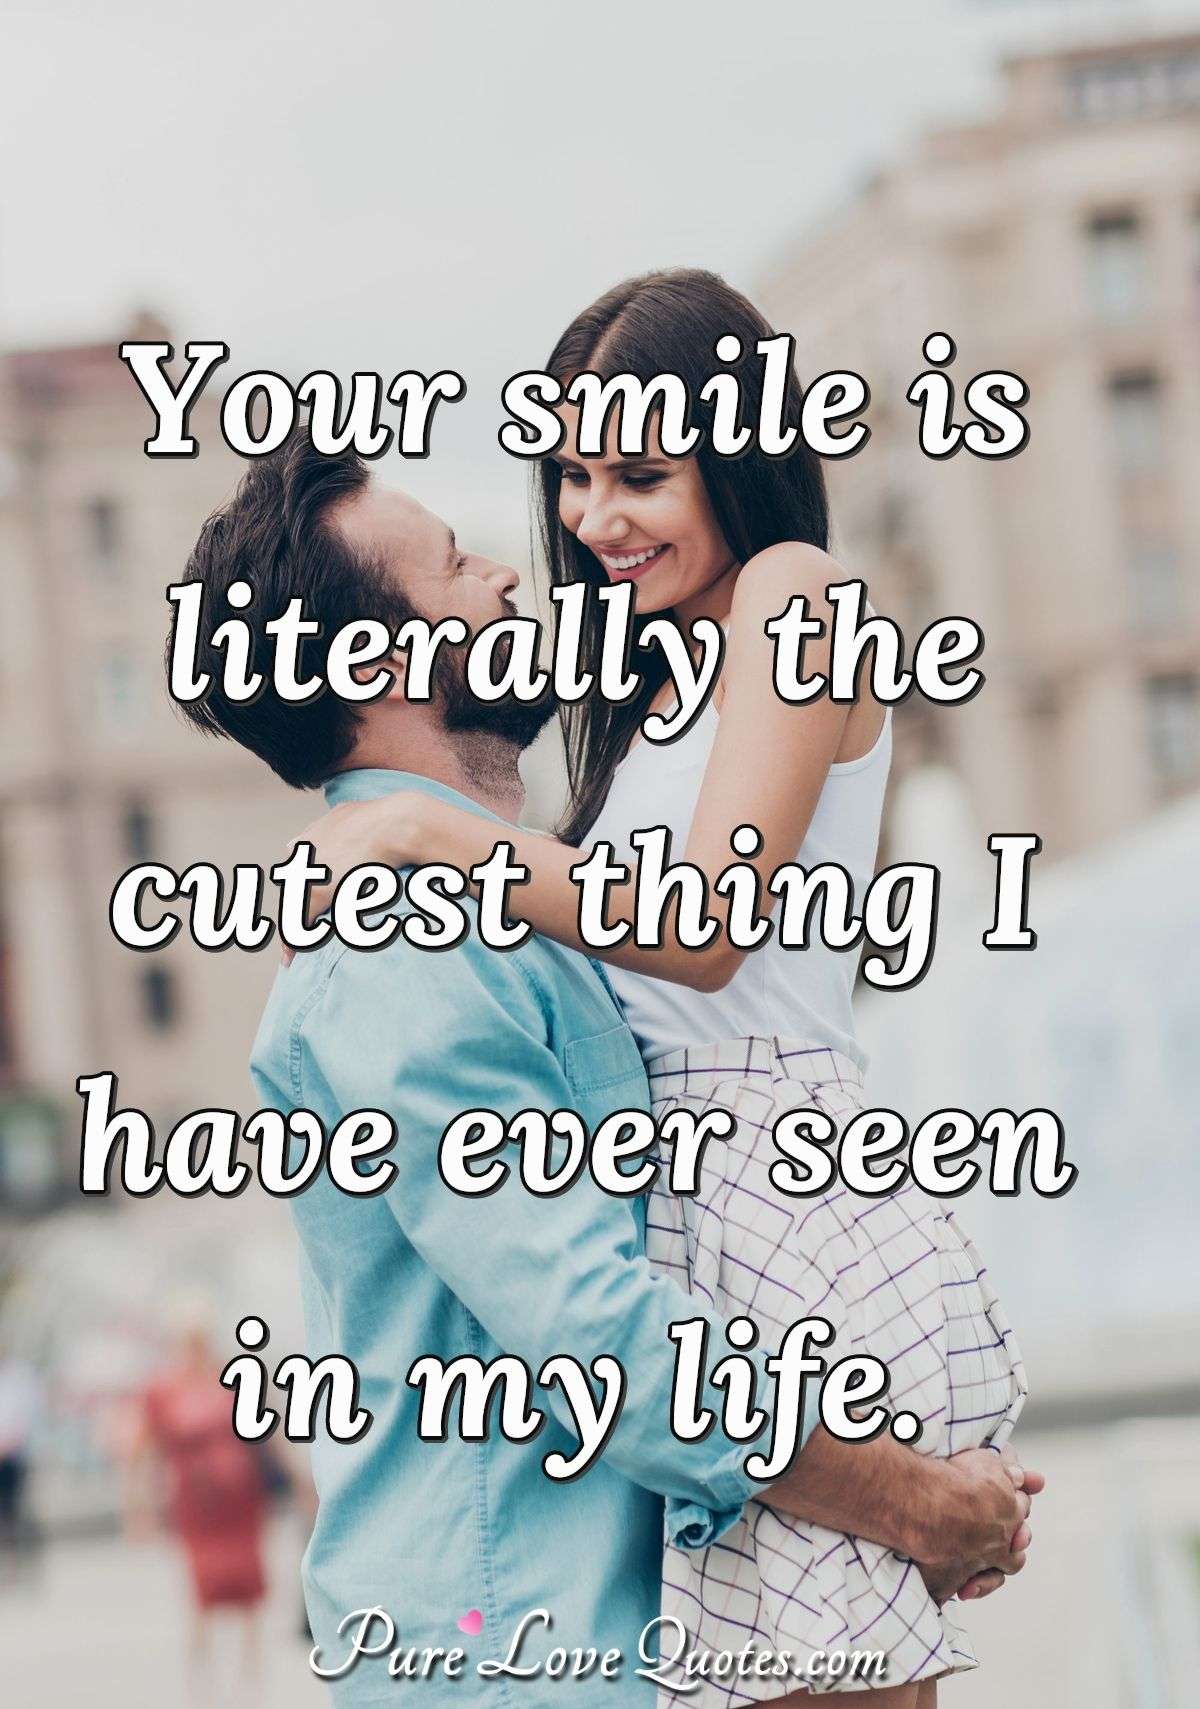 Your smile is literally the cutest thing I have ever seen in my life. - Anonymous